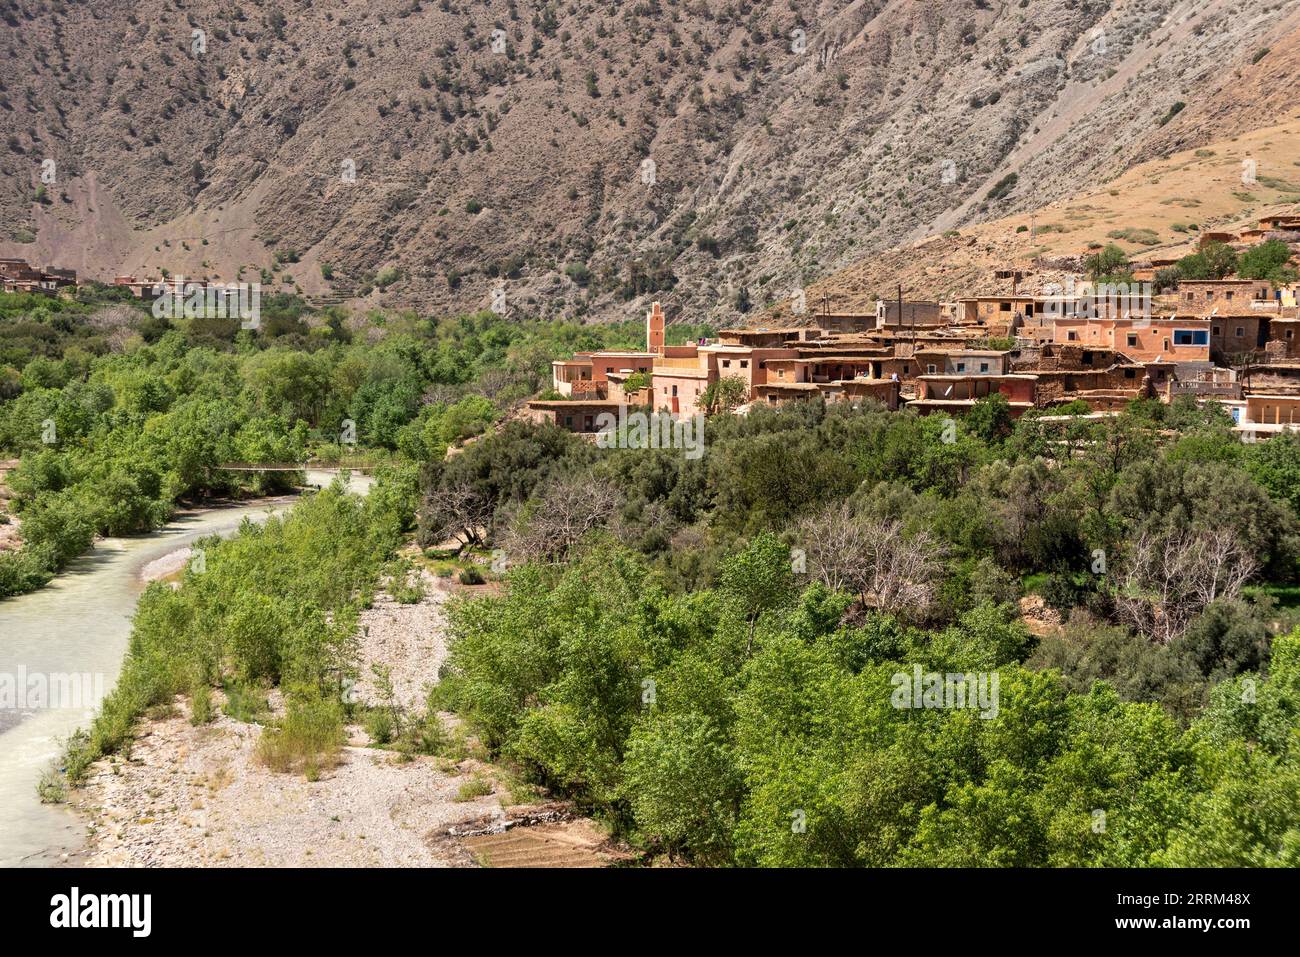 Picturesque village Douar Ouddift at the Tizi n'Test pass in the Atlas mountains of Morocco Stock Photo